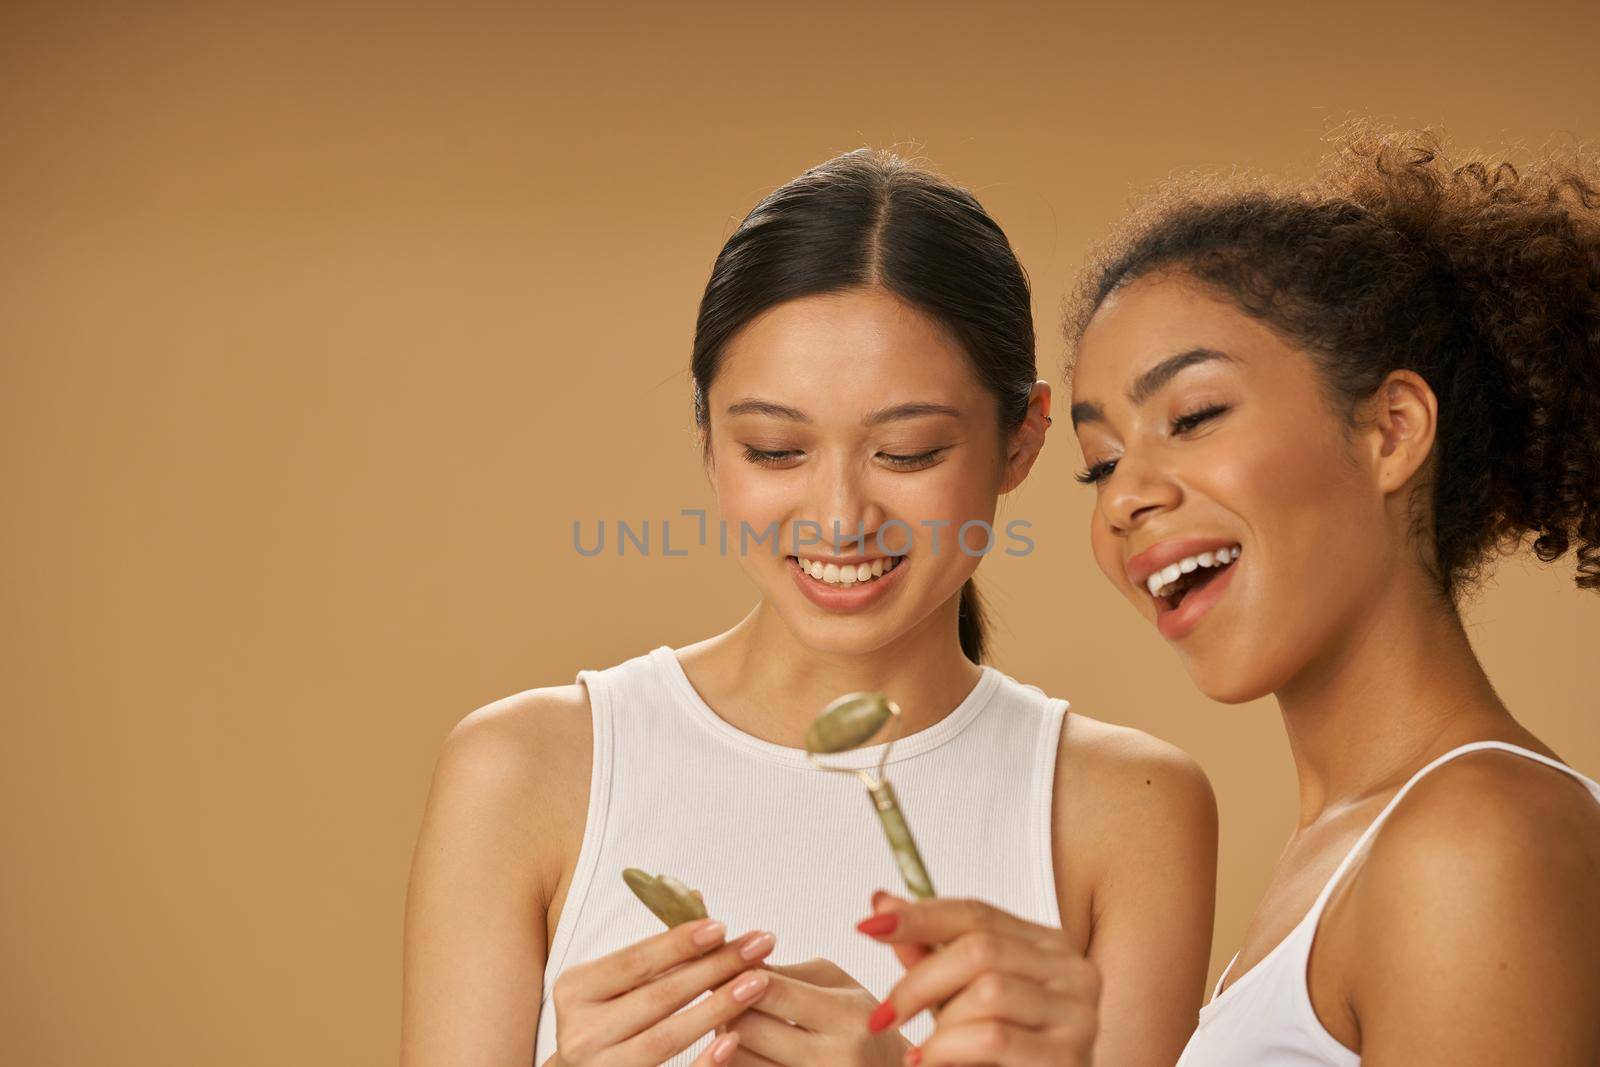 Smiling young women holding, looking at jade roller and facial gua sha while posing together isolated over beige background by friendsstock